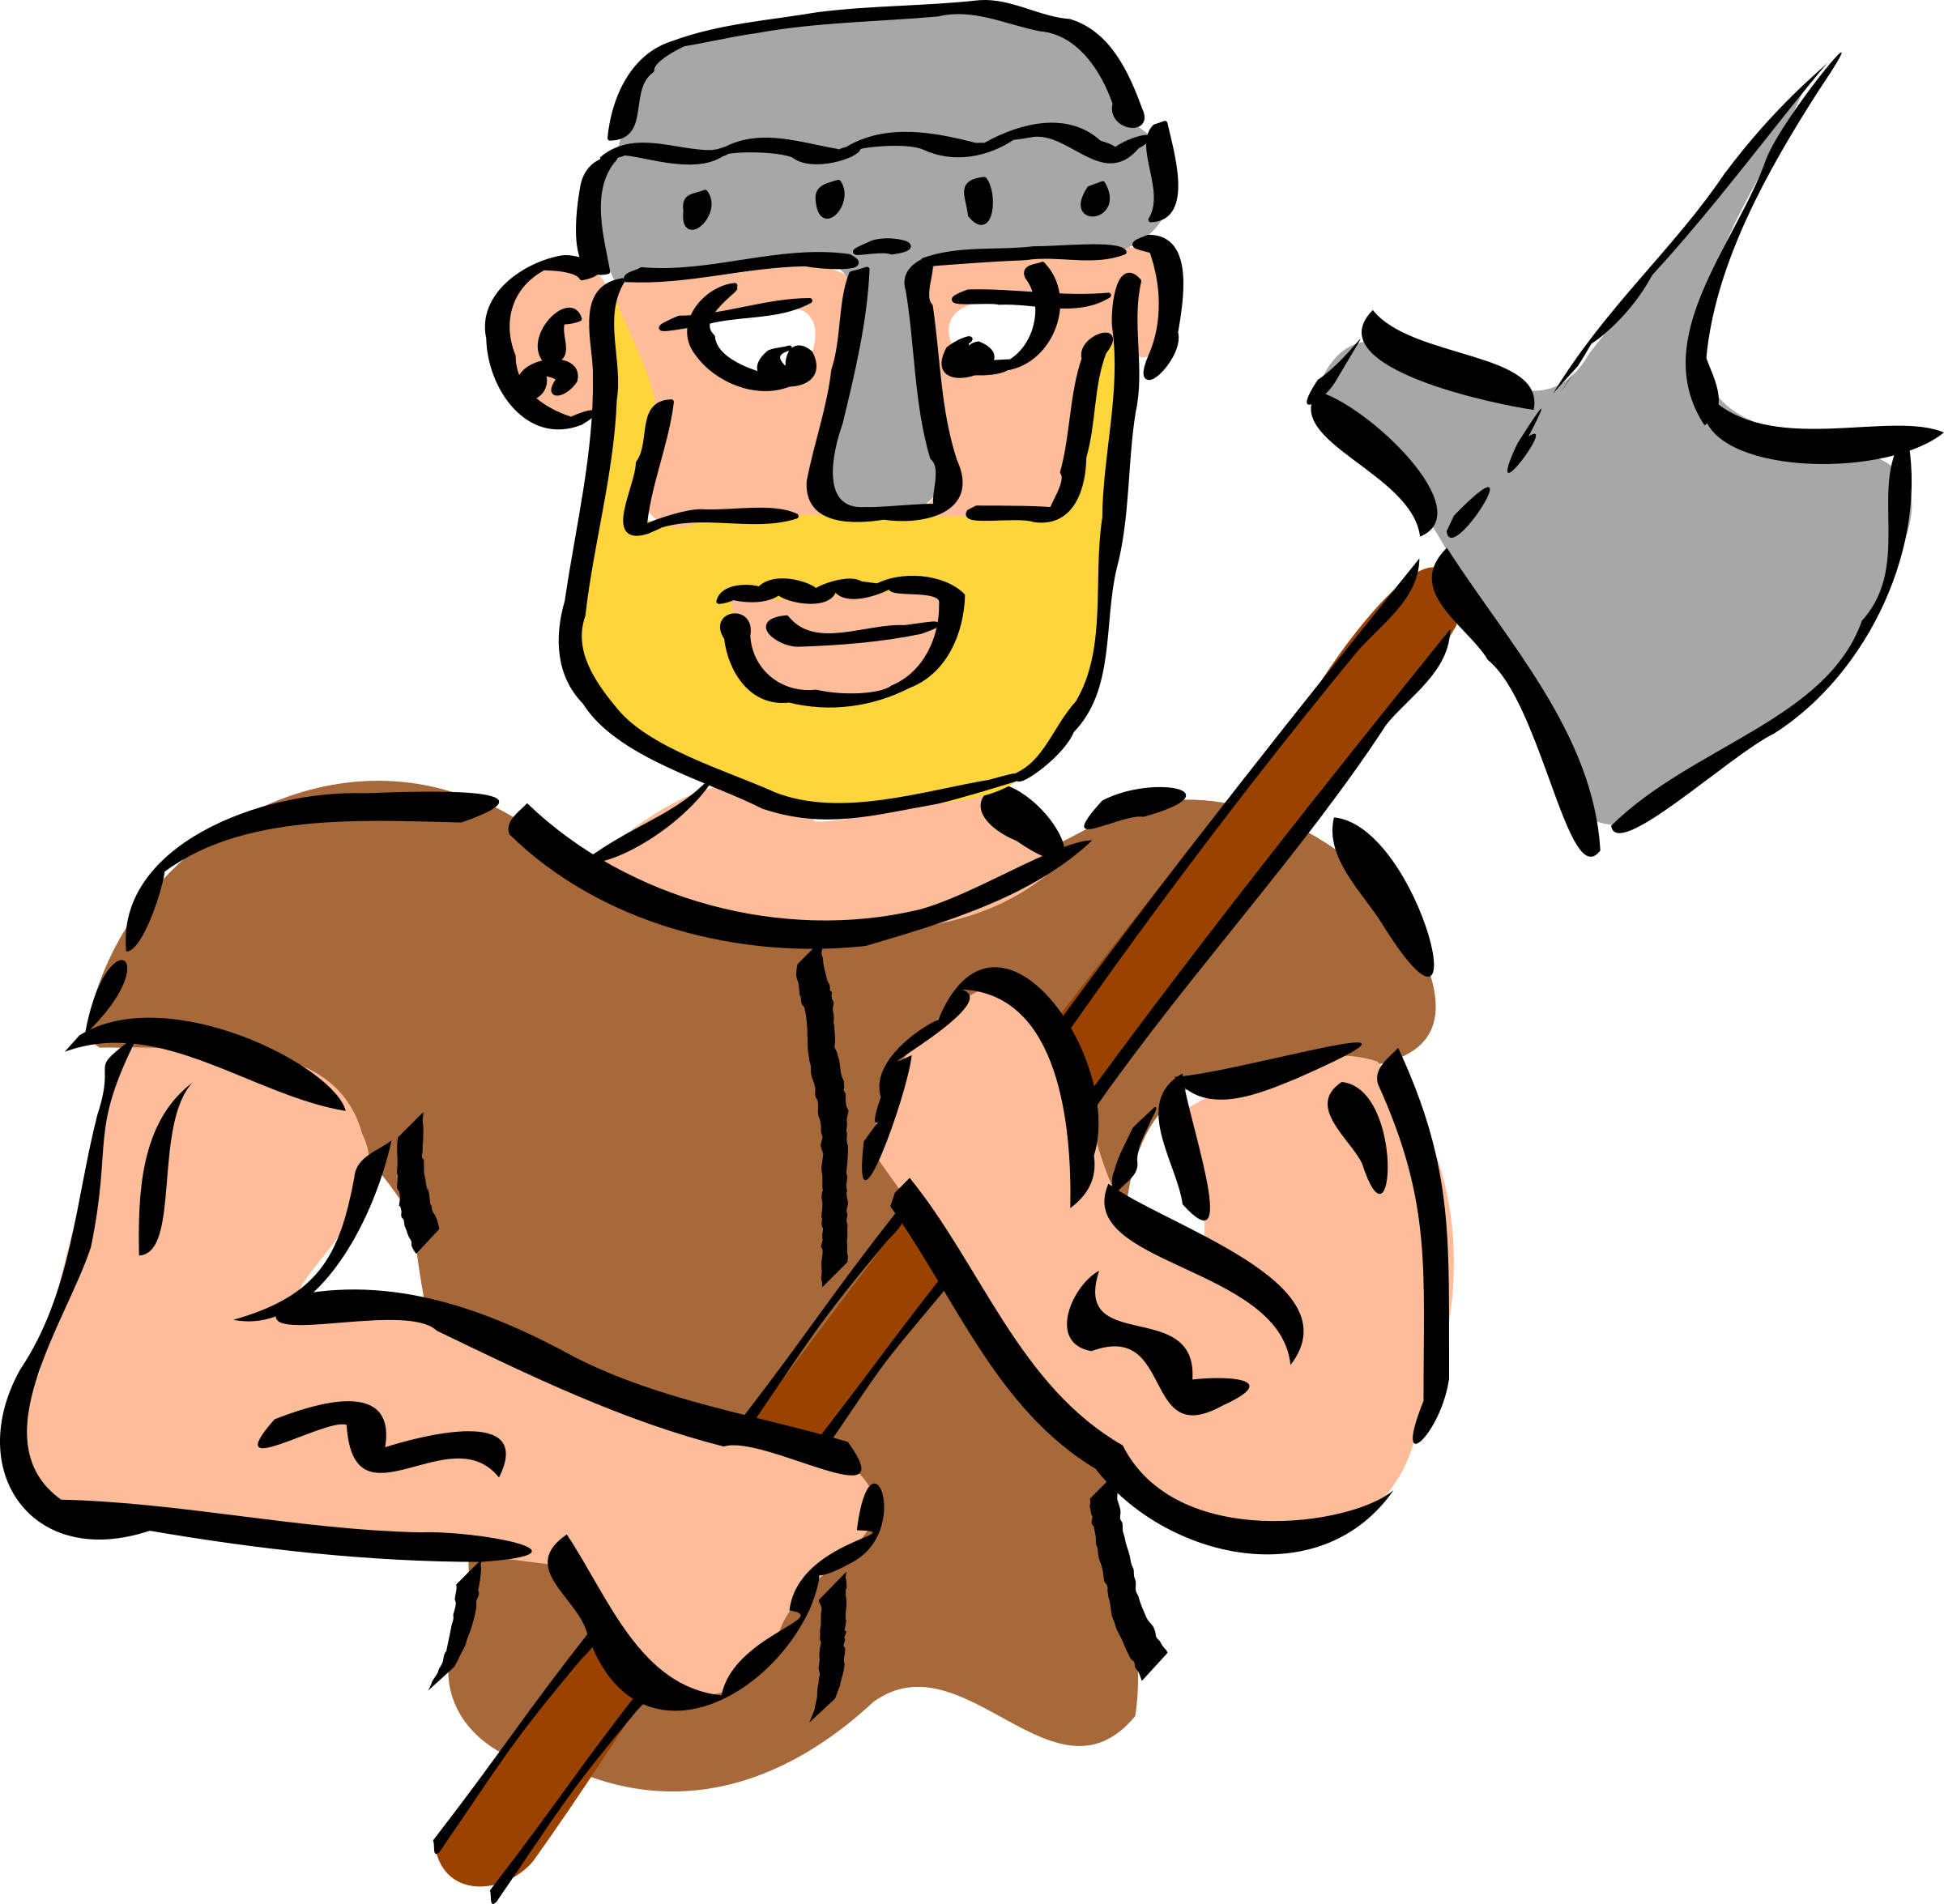 Big image png. Medieval clipart norman soldier